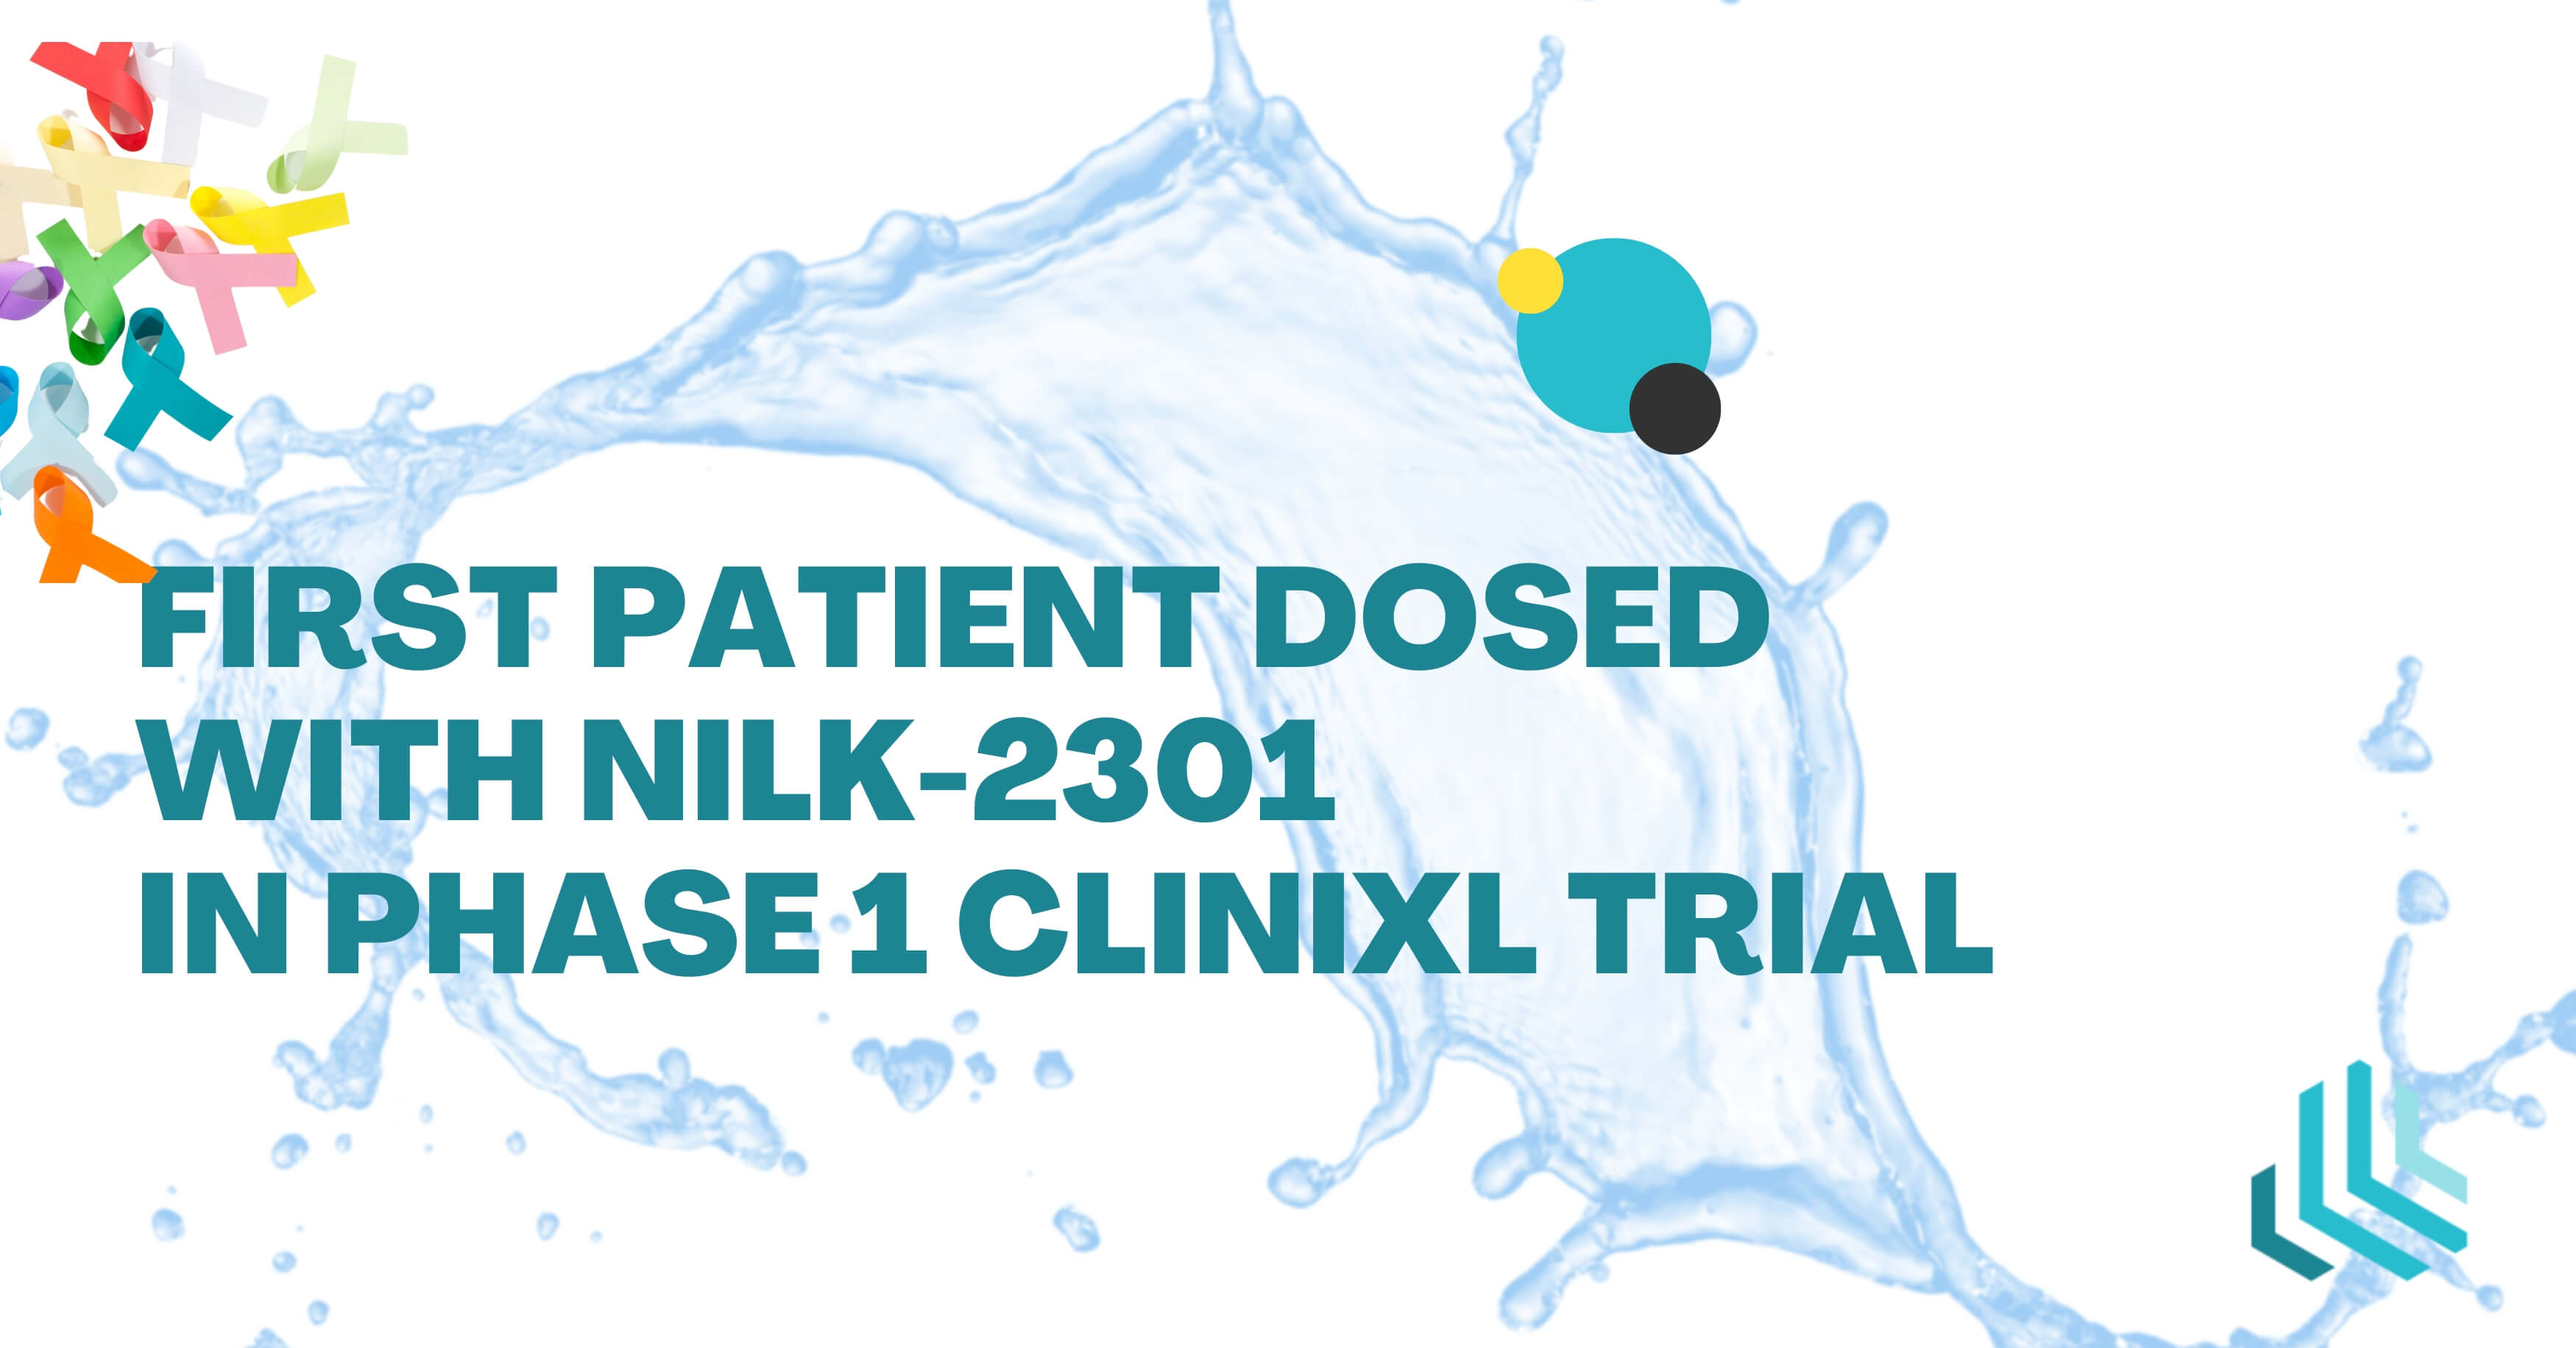 First patient dosed with NILK-2301 in Phase I clinical trial